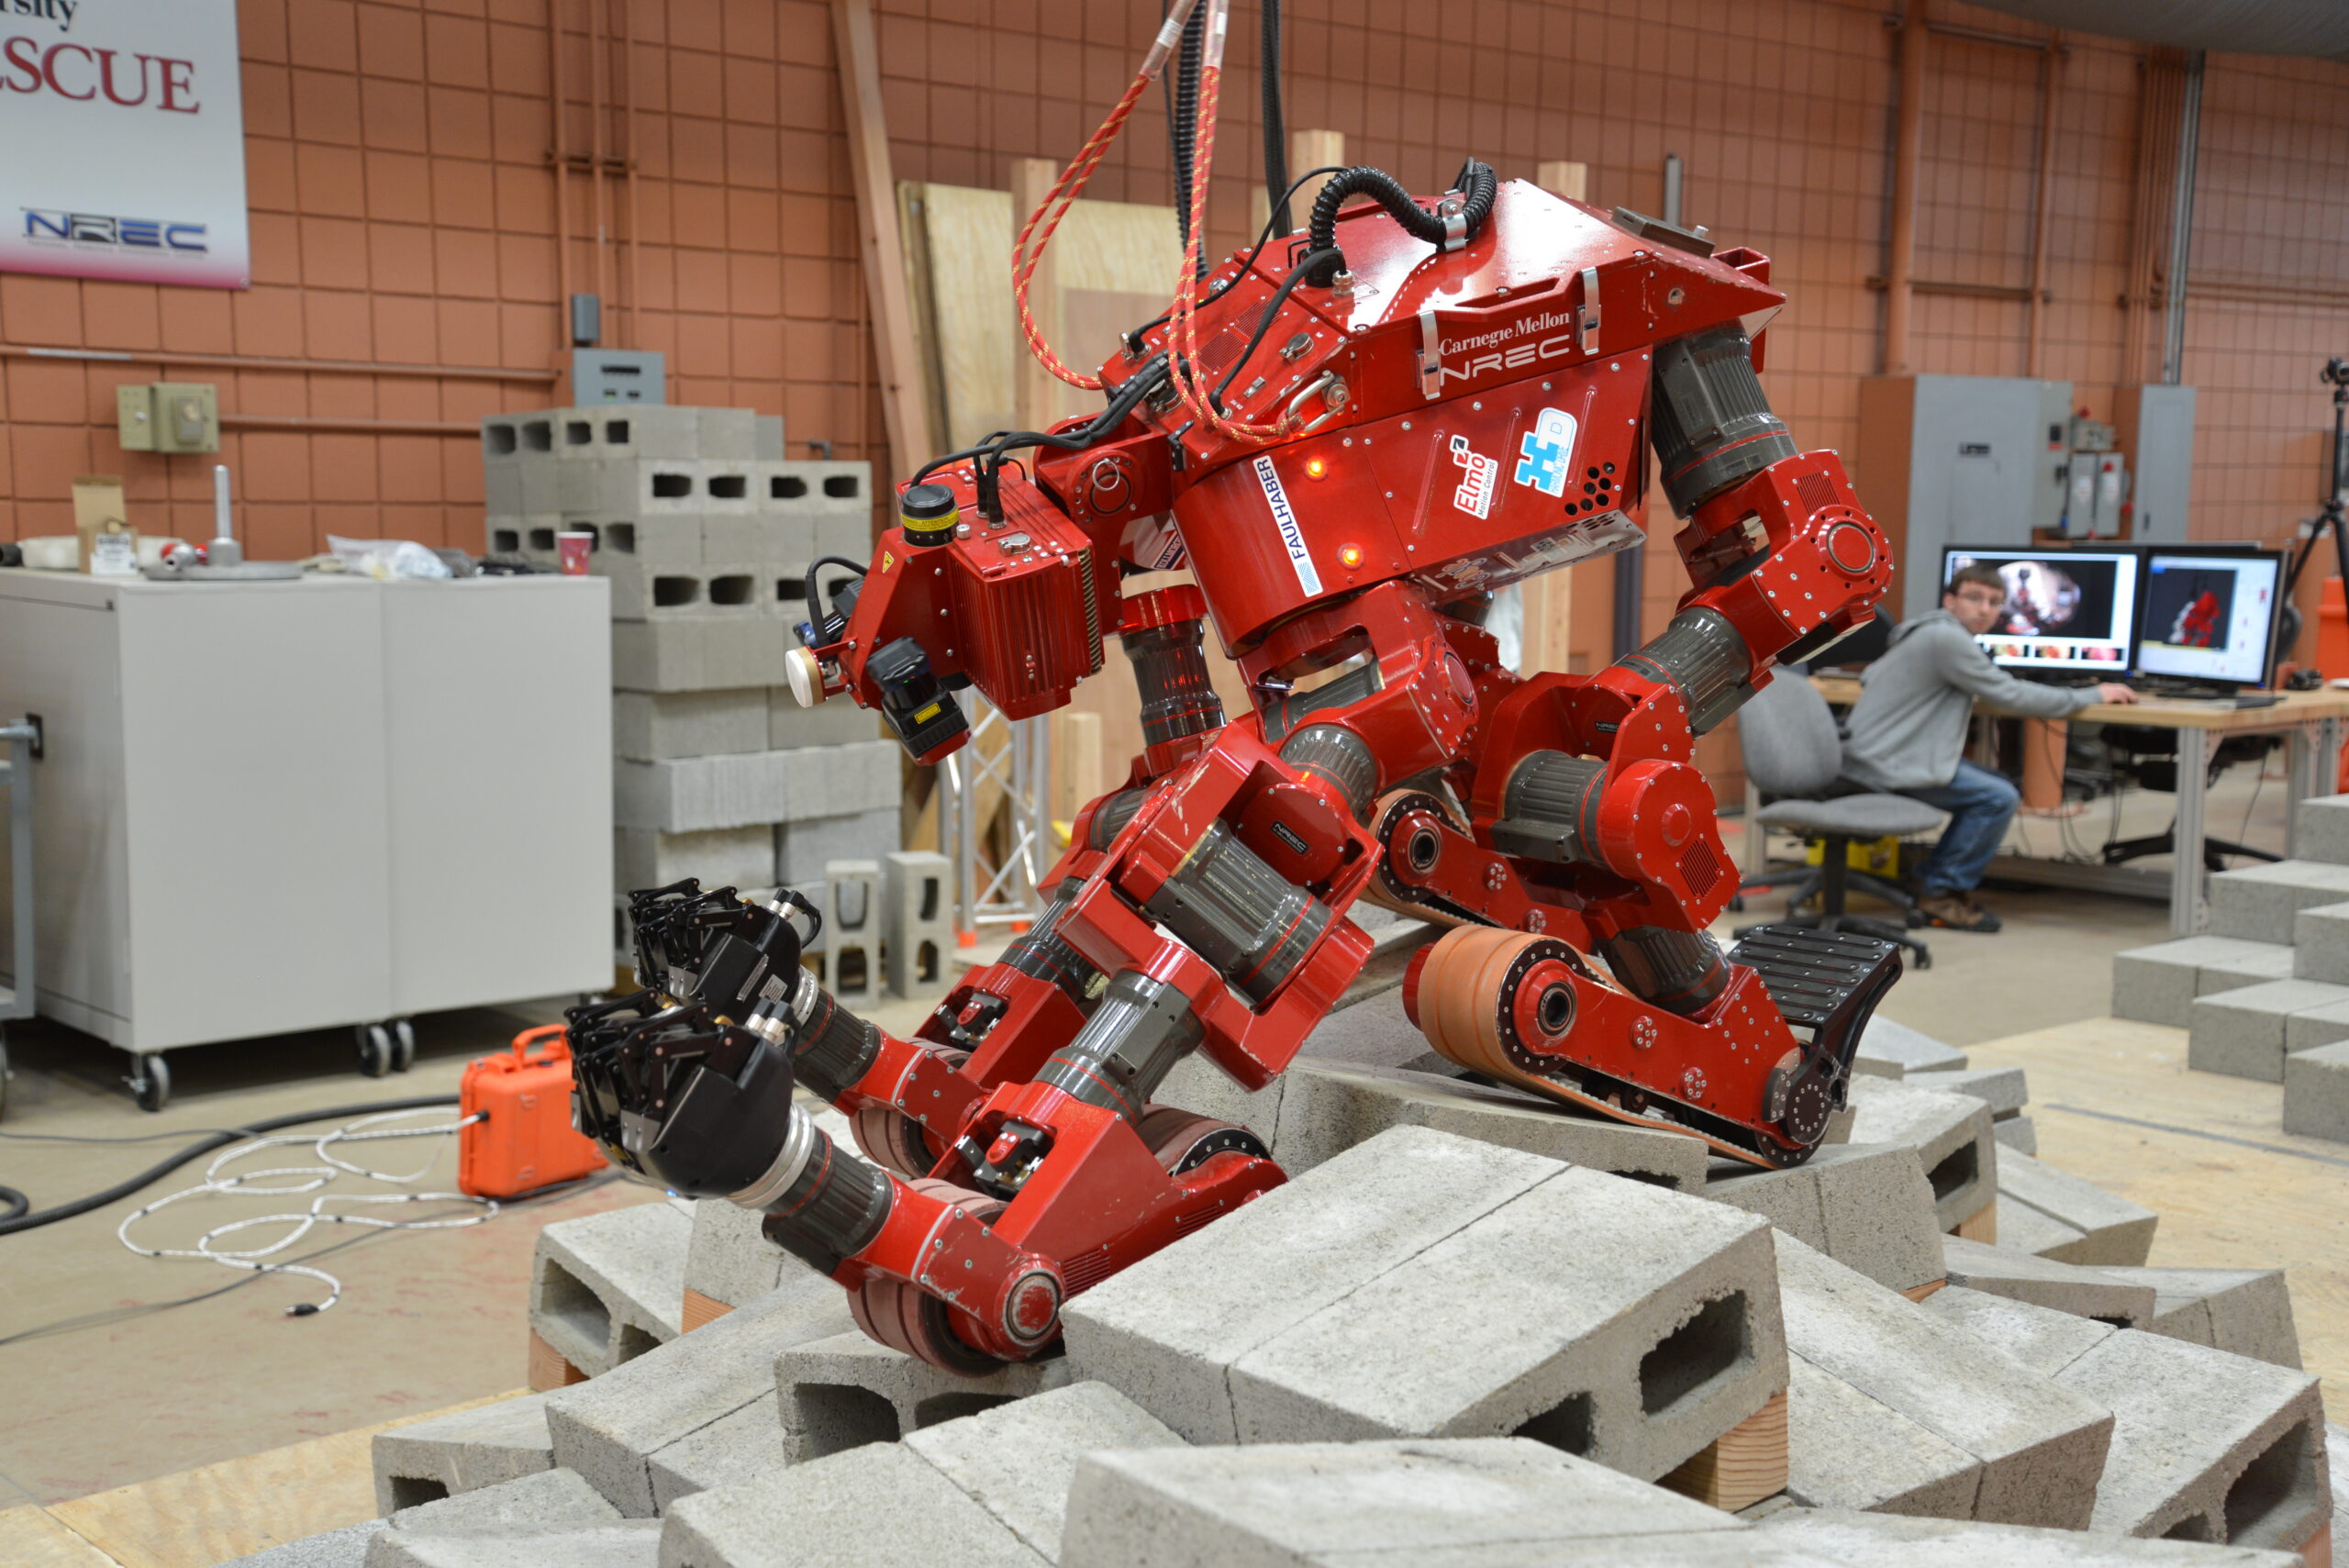 Death By Slapstick: Will The DARPA Robotics Challenge’s Final, Grueling Stage Kill The Humanoid Bot?